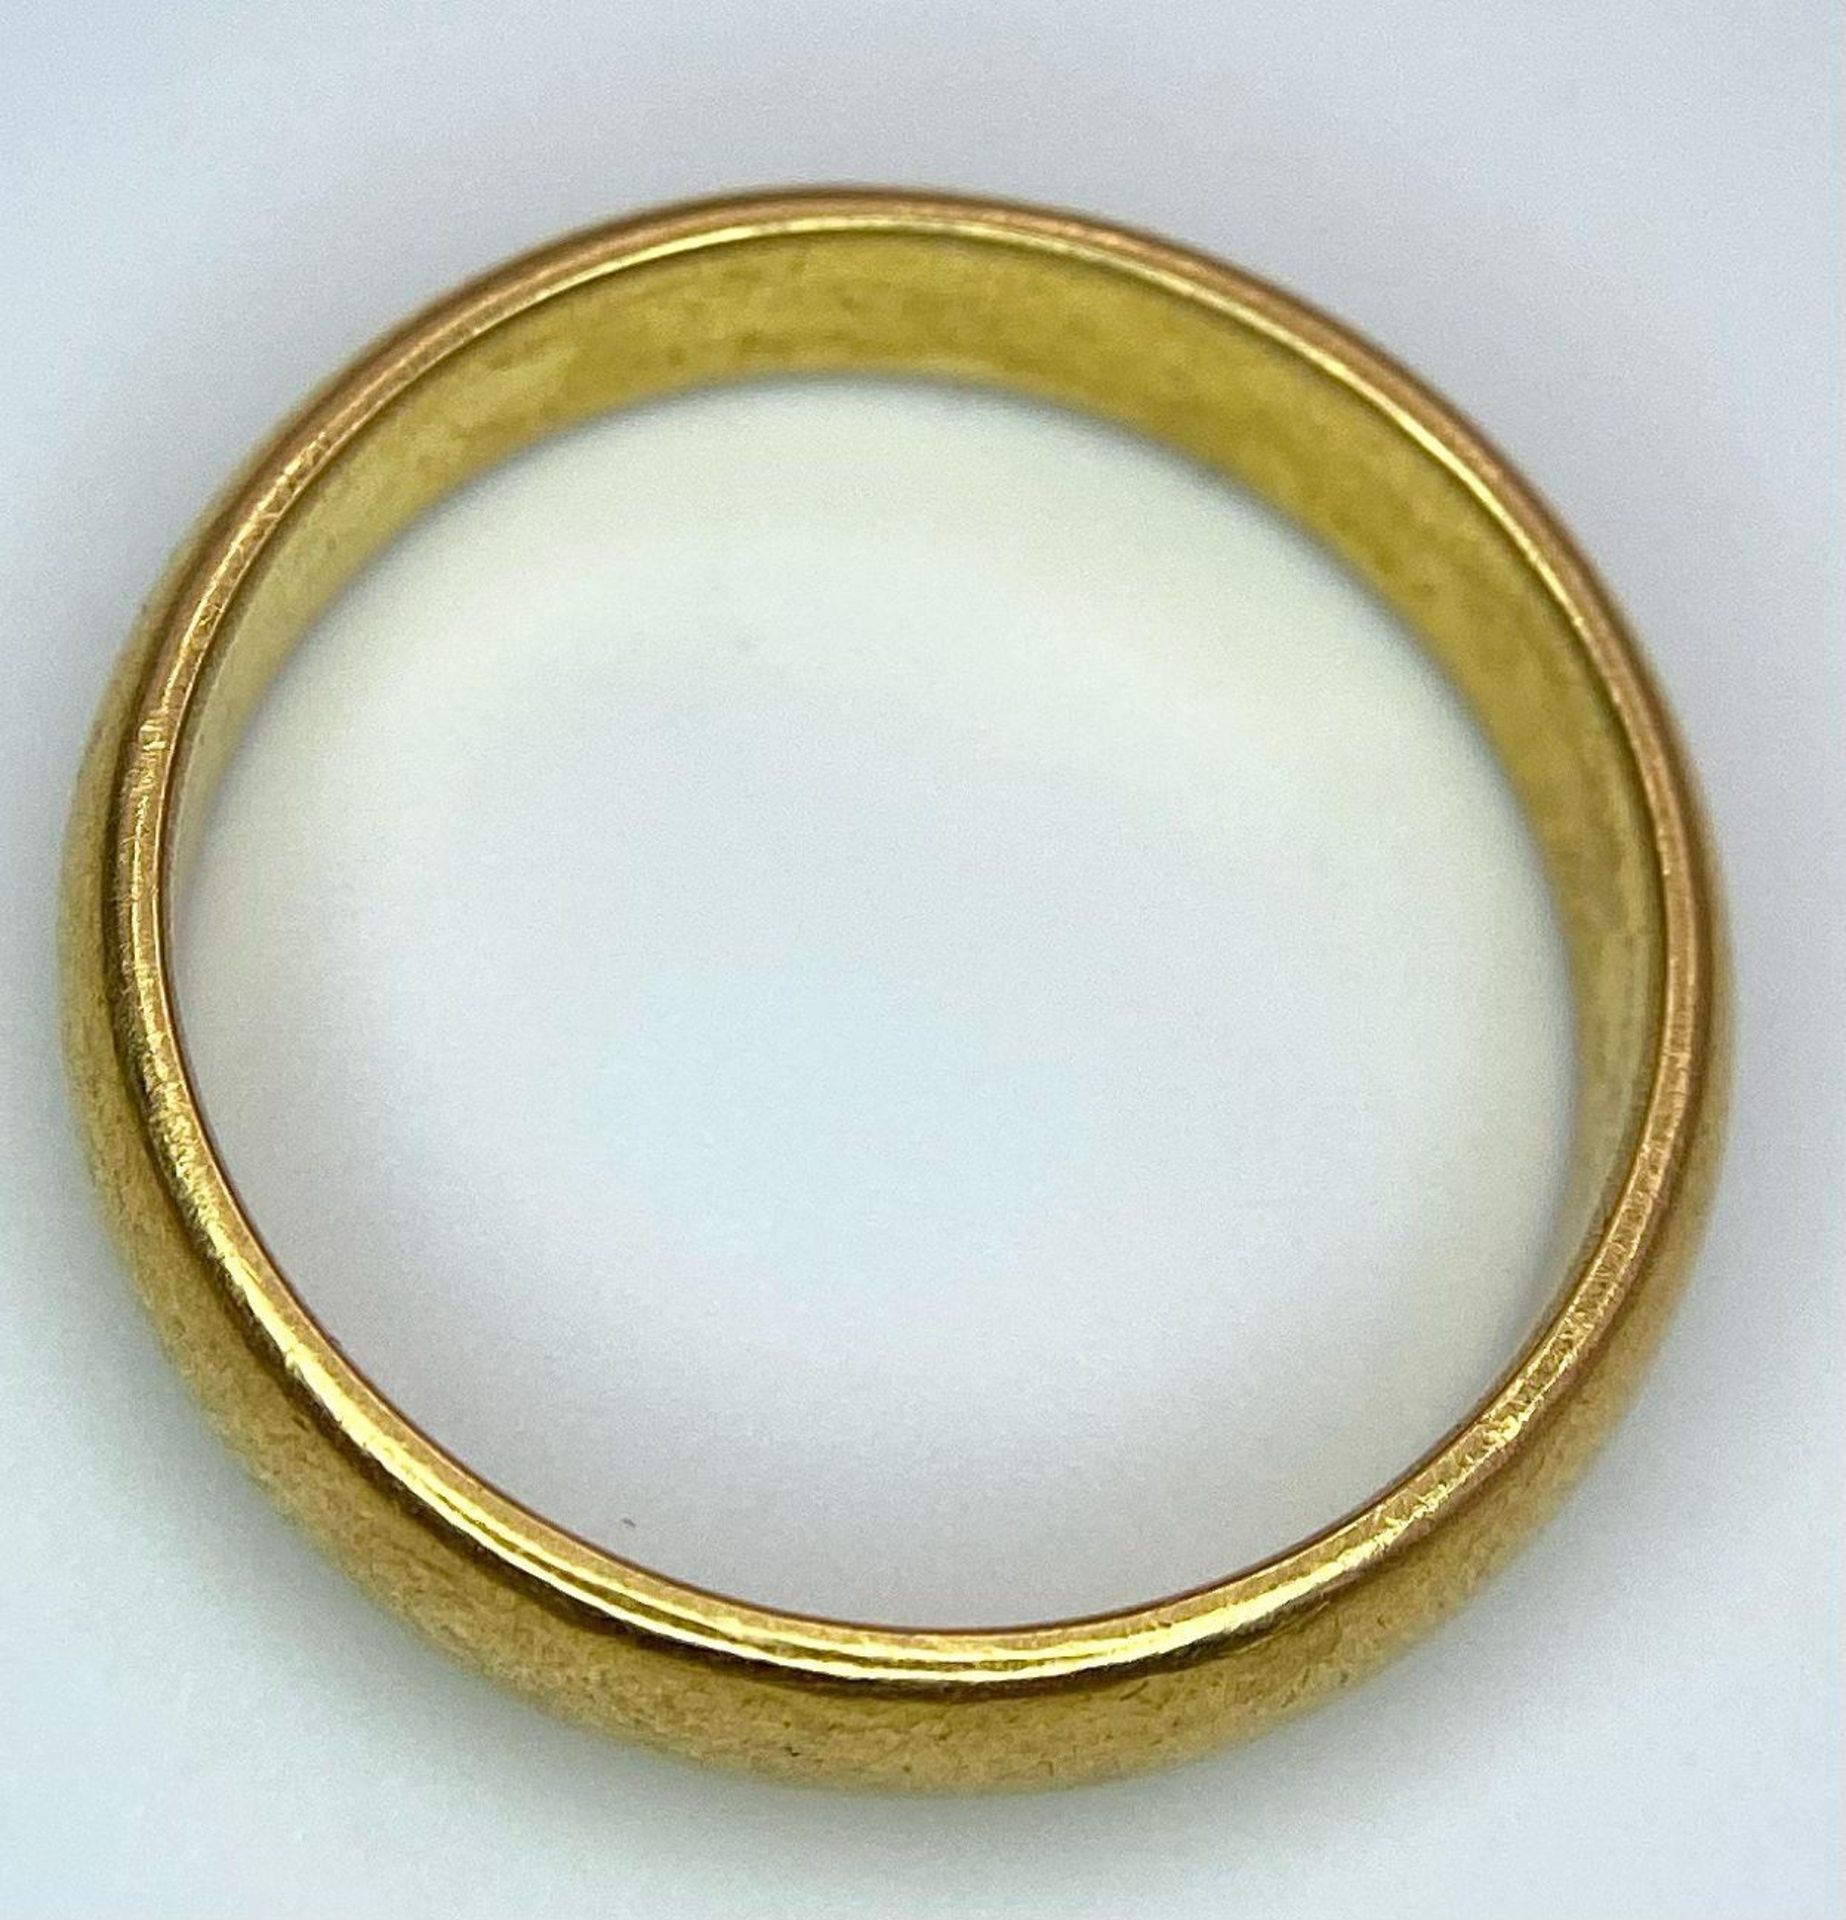 A Vintage 22K Yellow Gold Band Ring. 4mm width. Size O. 5.32g weight. Full UK hallmarks. - Image 4 of 5